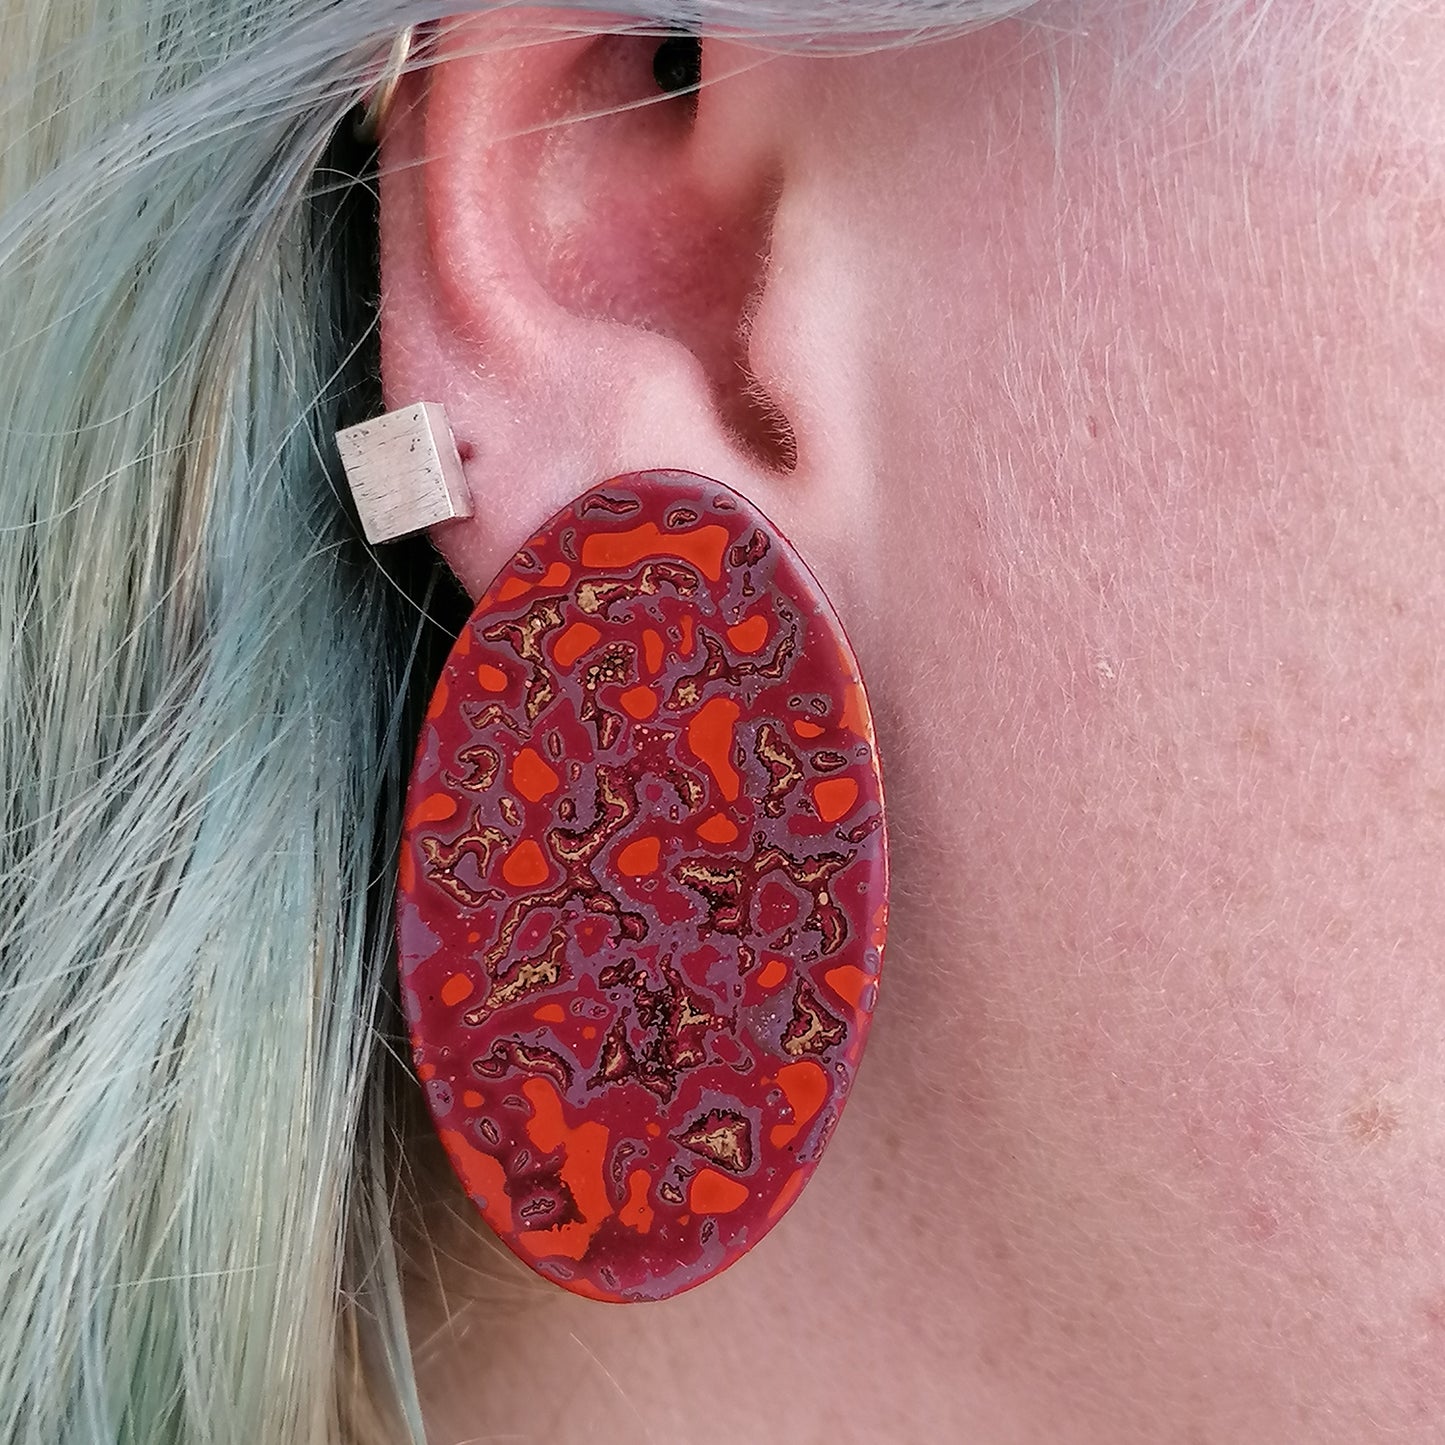 Image shows a single long oval earring with a pattern in pink, purple, orange and white. The earring is being modeled by a blue haired model